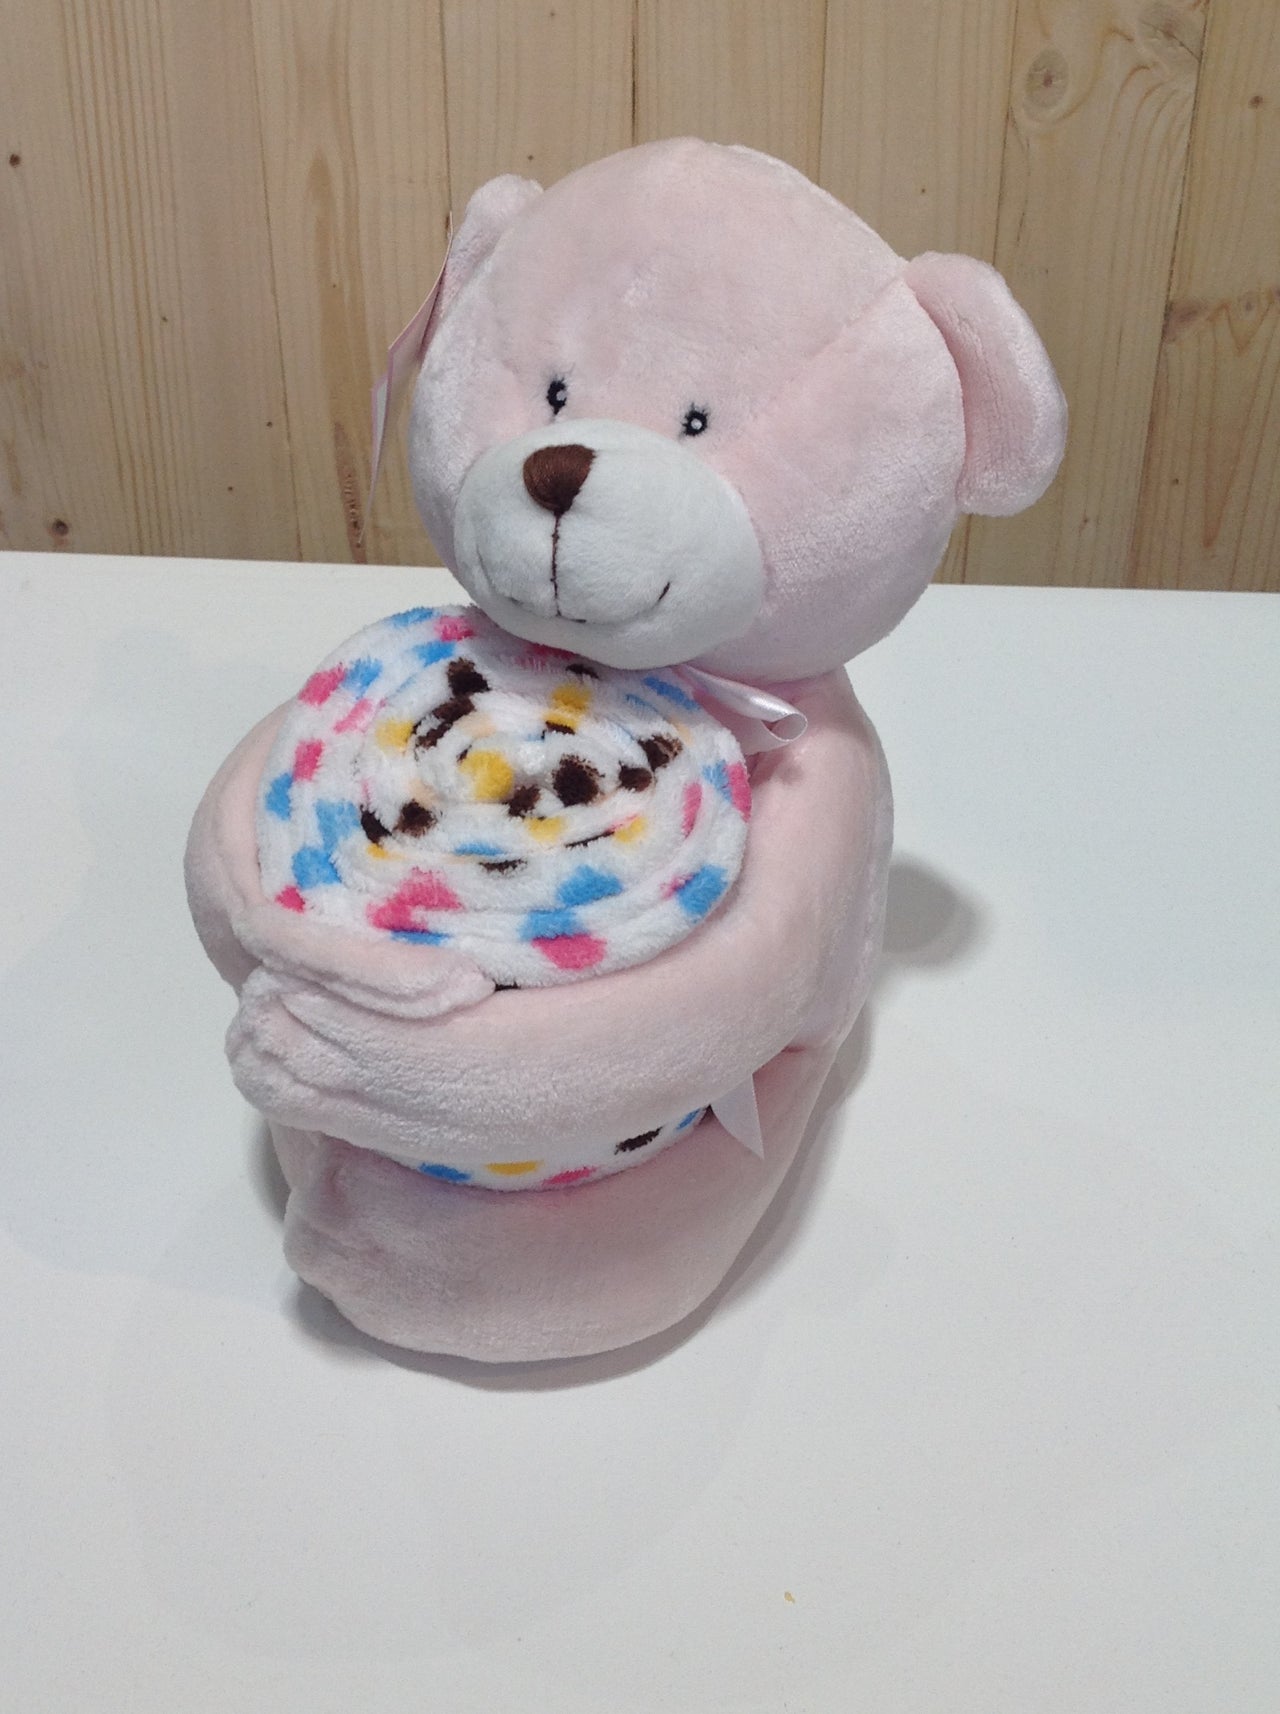 Pink teddy bear with blanket